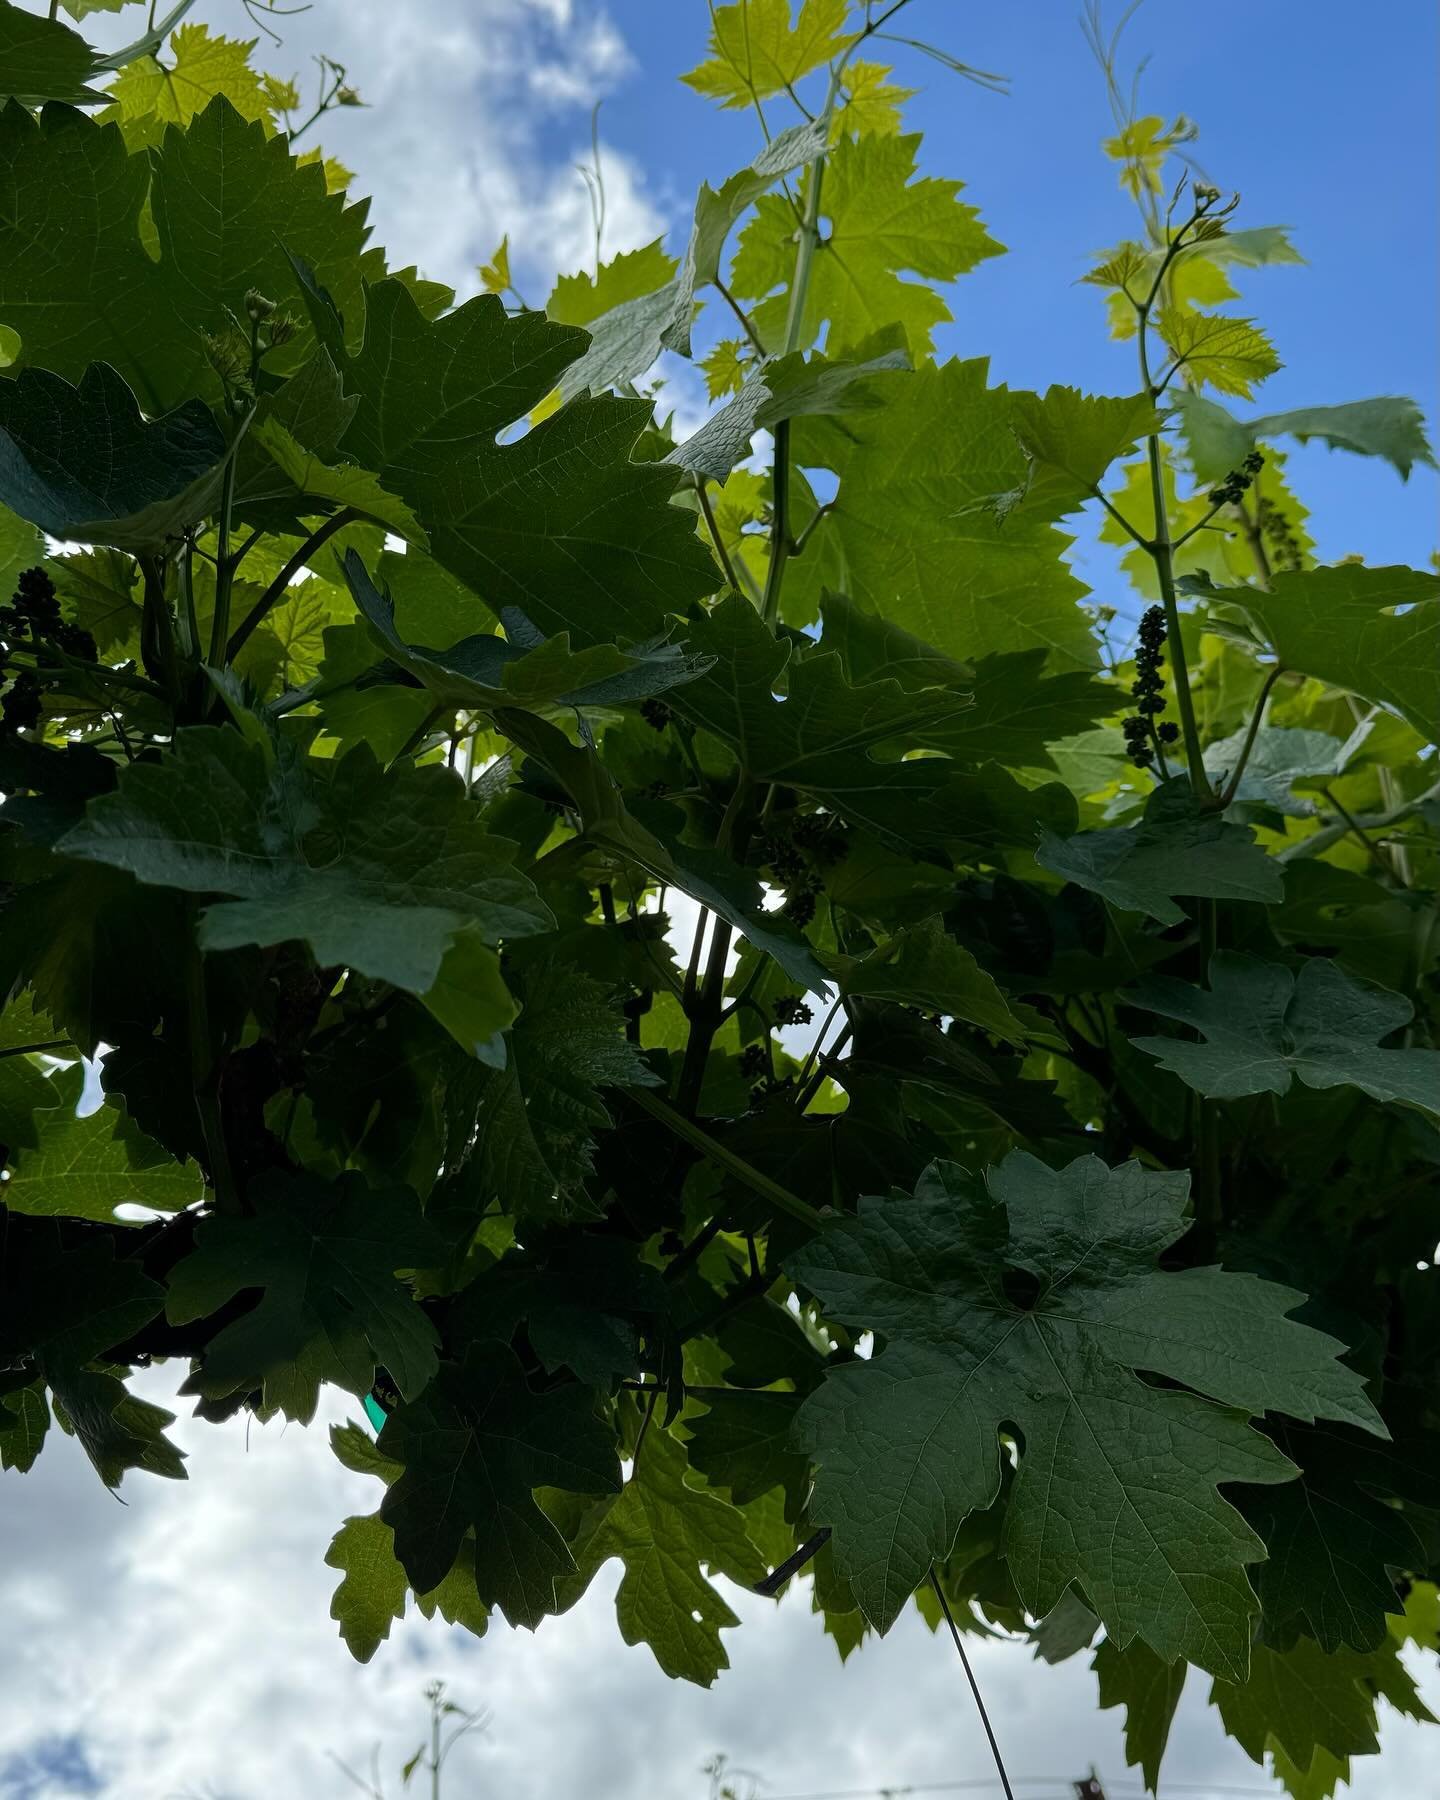 Vinny is coming along well in the Flower Cluster Initiation stage of his growth. Flowering coming soon &hellip;🌱😁

Did you know, growth in vineyards starts off slowly, with the expansion of leaves and shoots and the development of cluster florets. 